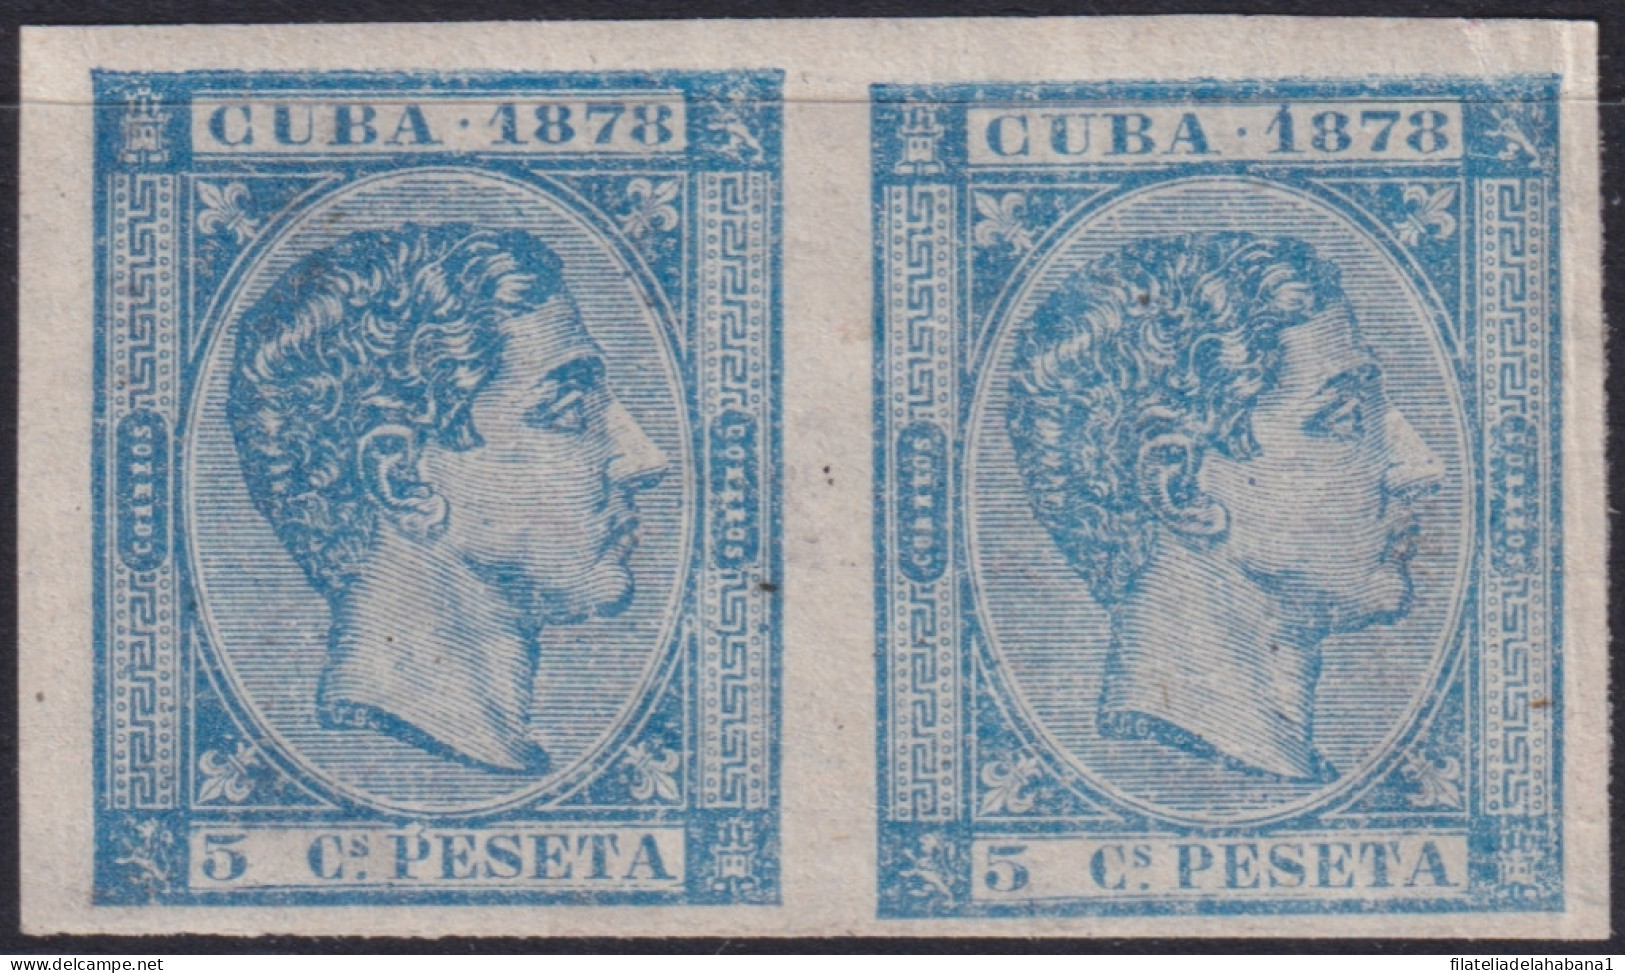 1878-223 CUBA ANTILLES 1878 MNH 5c ALFONSO XII IMPERFORATED.  - Voorfilatelie